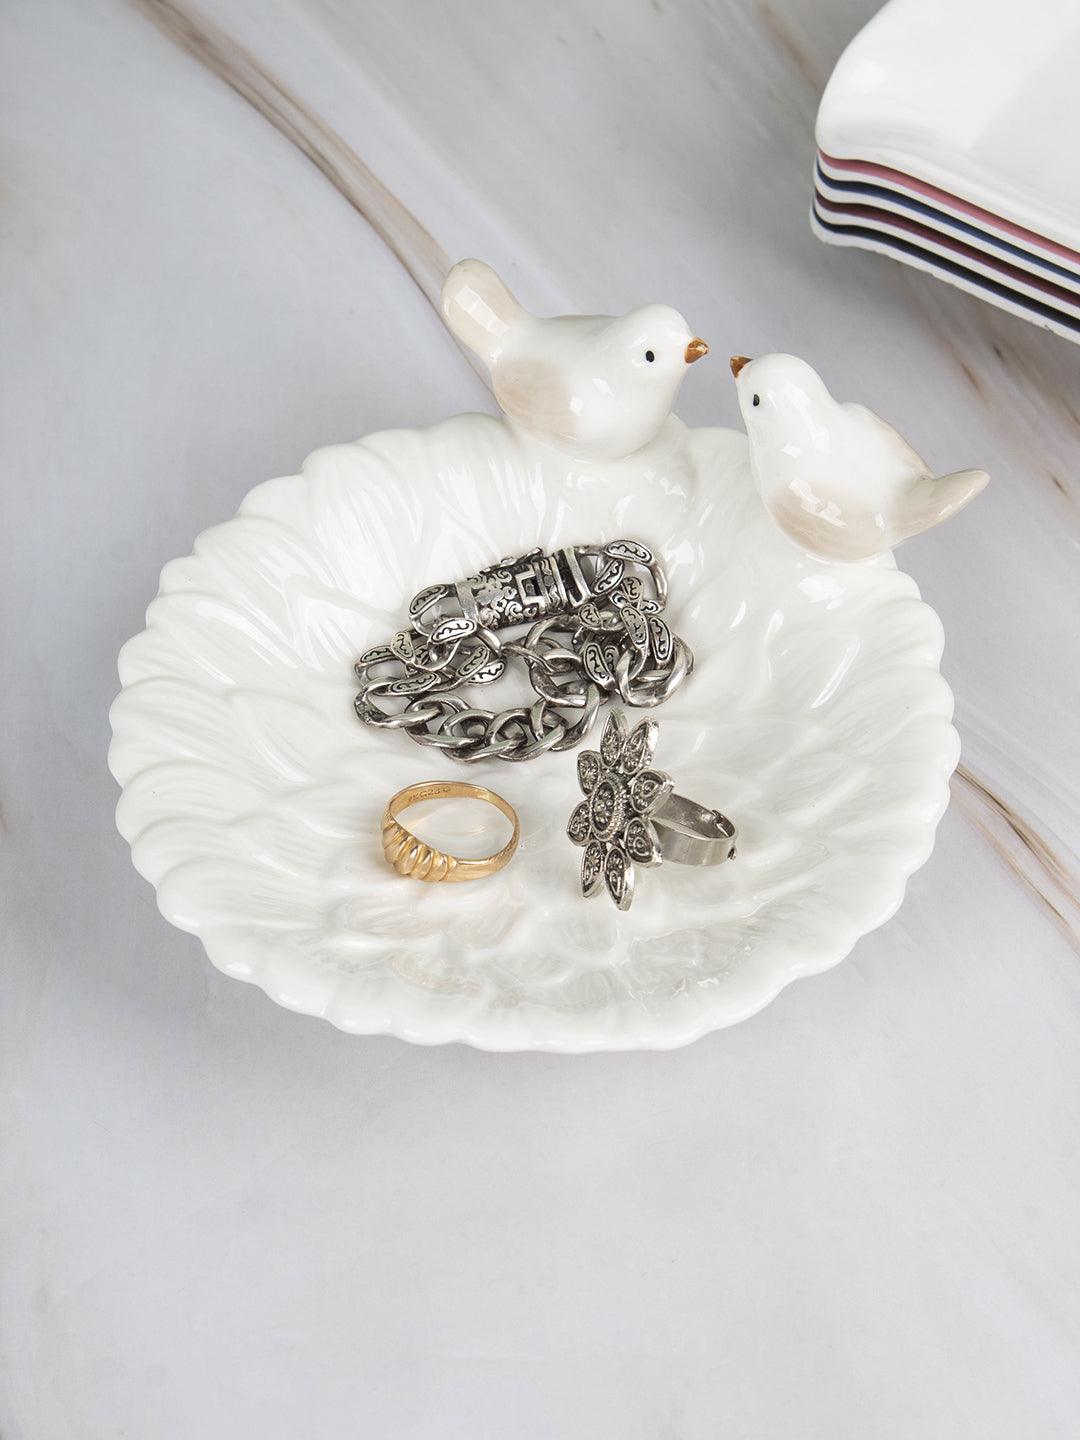 Jewellery Holder Tray, Crafted Bird, for Dressing Table, Ring Dash, Round, White, Ceramic - MARKET 99